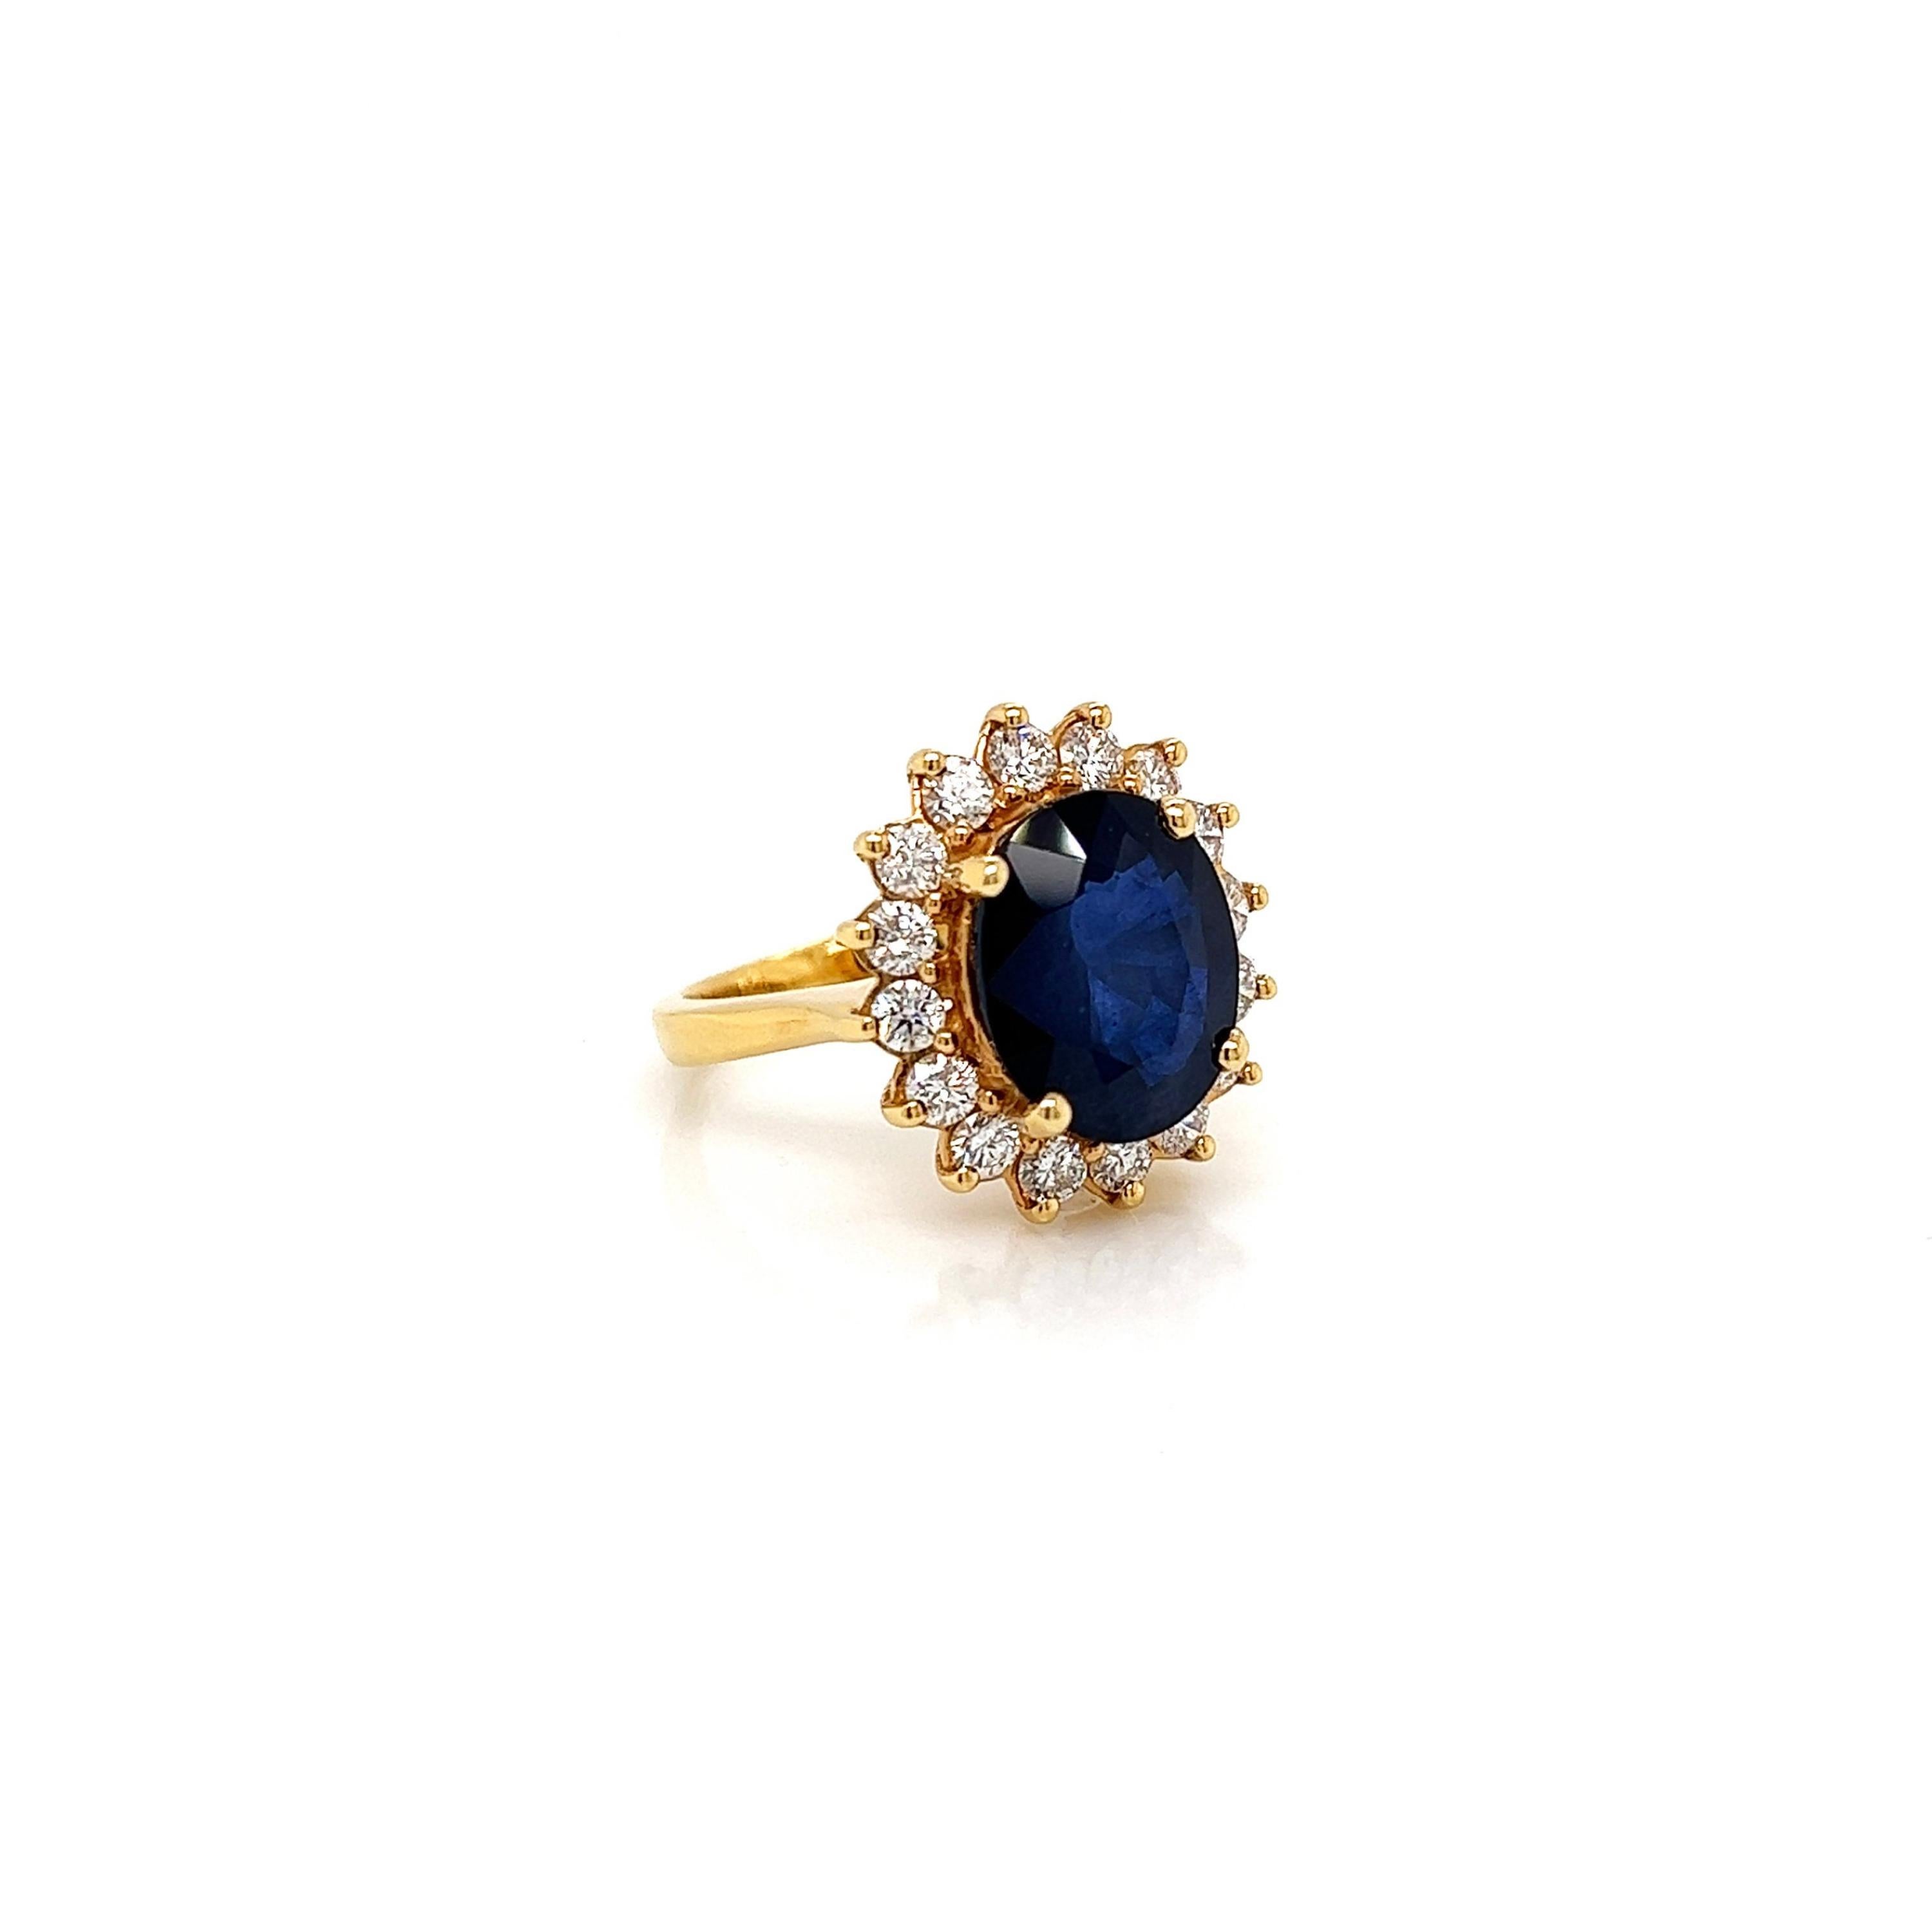 Oval Cut 4.63 Carat Halo Blue Ceylon Sapphire Diamond Ring Floral Sapphire Ring in Gold For Sale